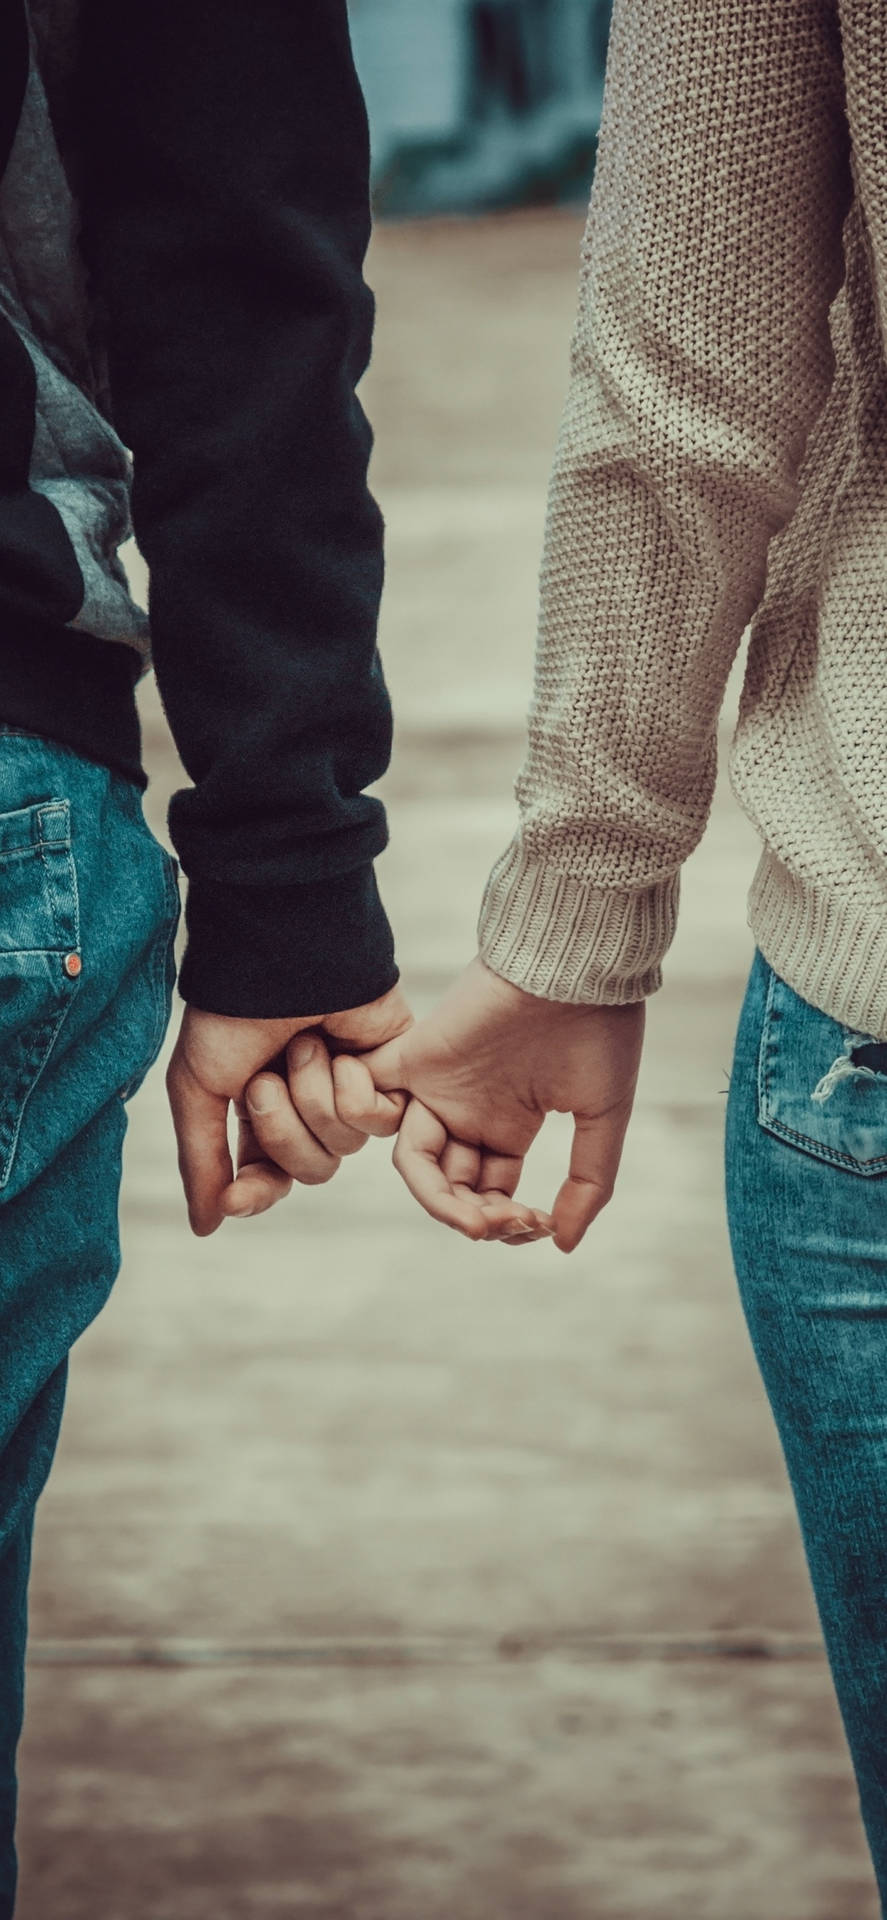 Cute Holding Hands Couple In Sweatshirts Background